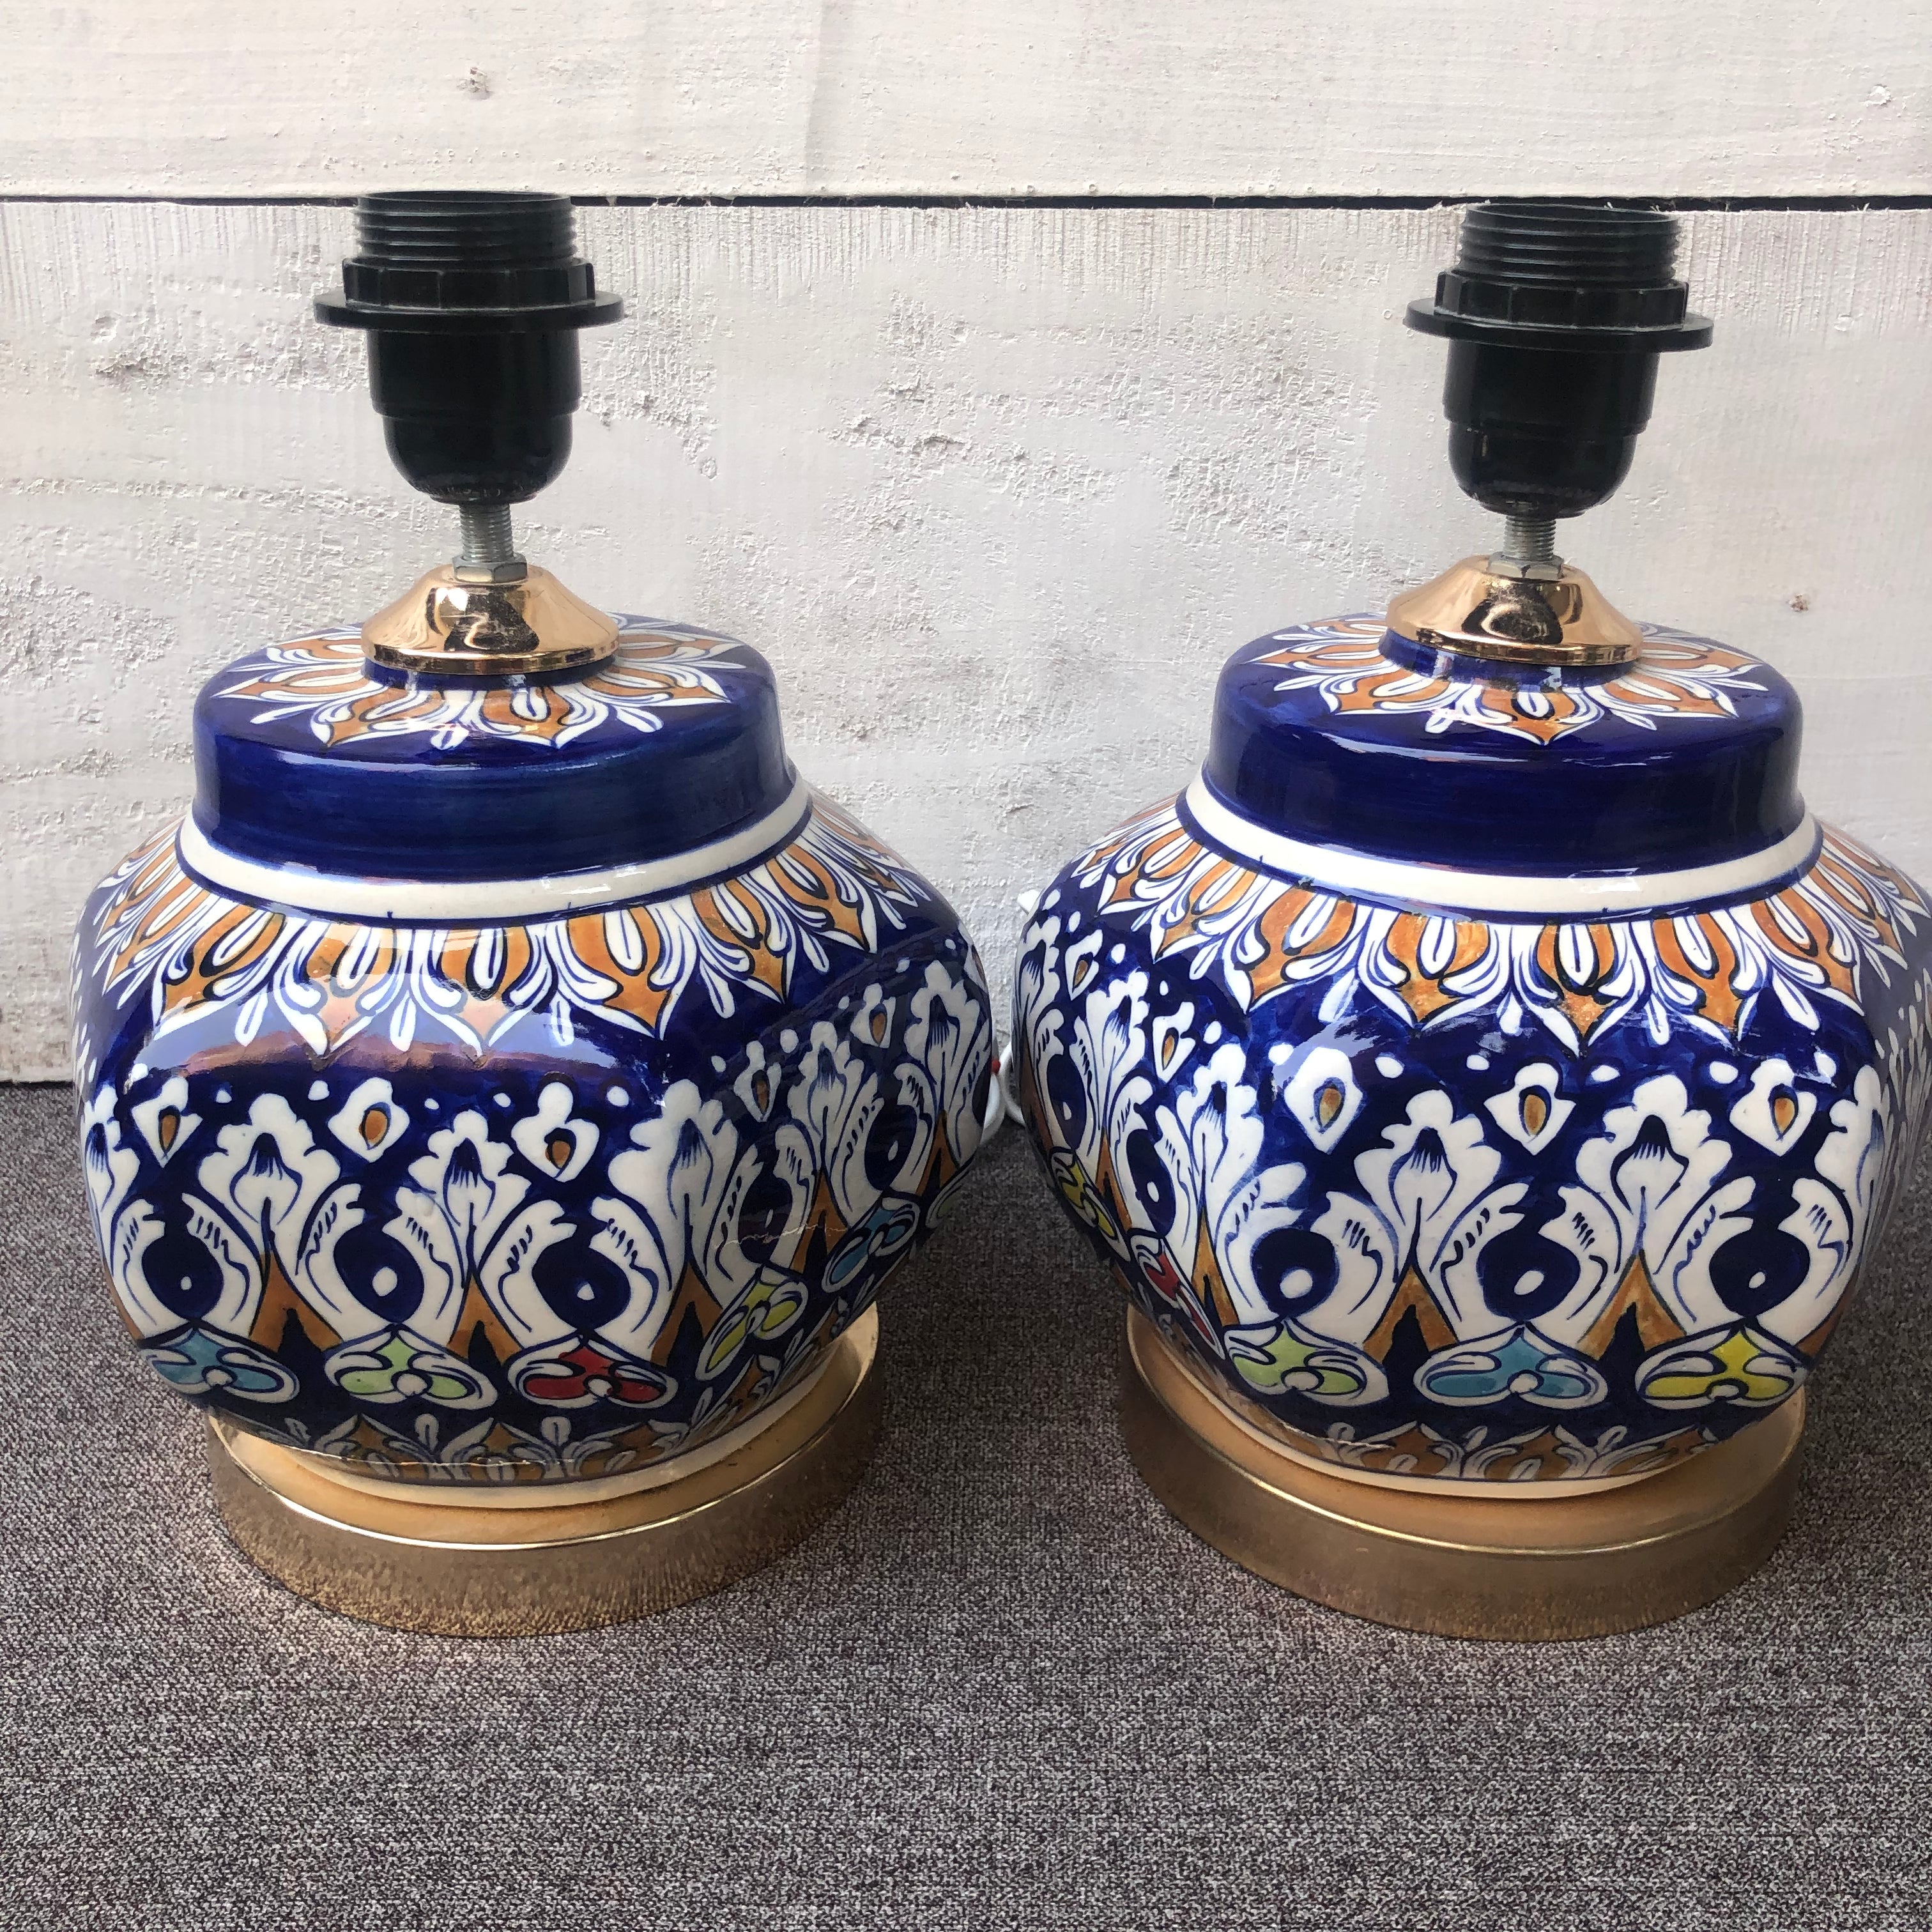 New Tranquility Small Lamp - Set of 2